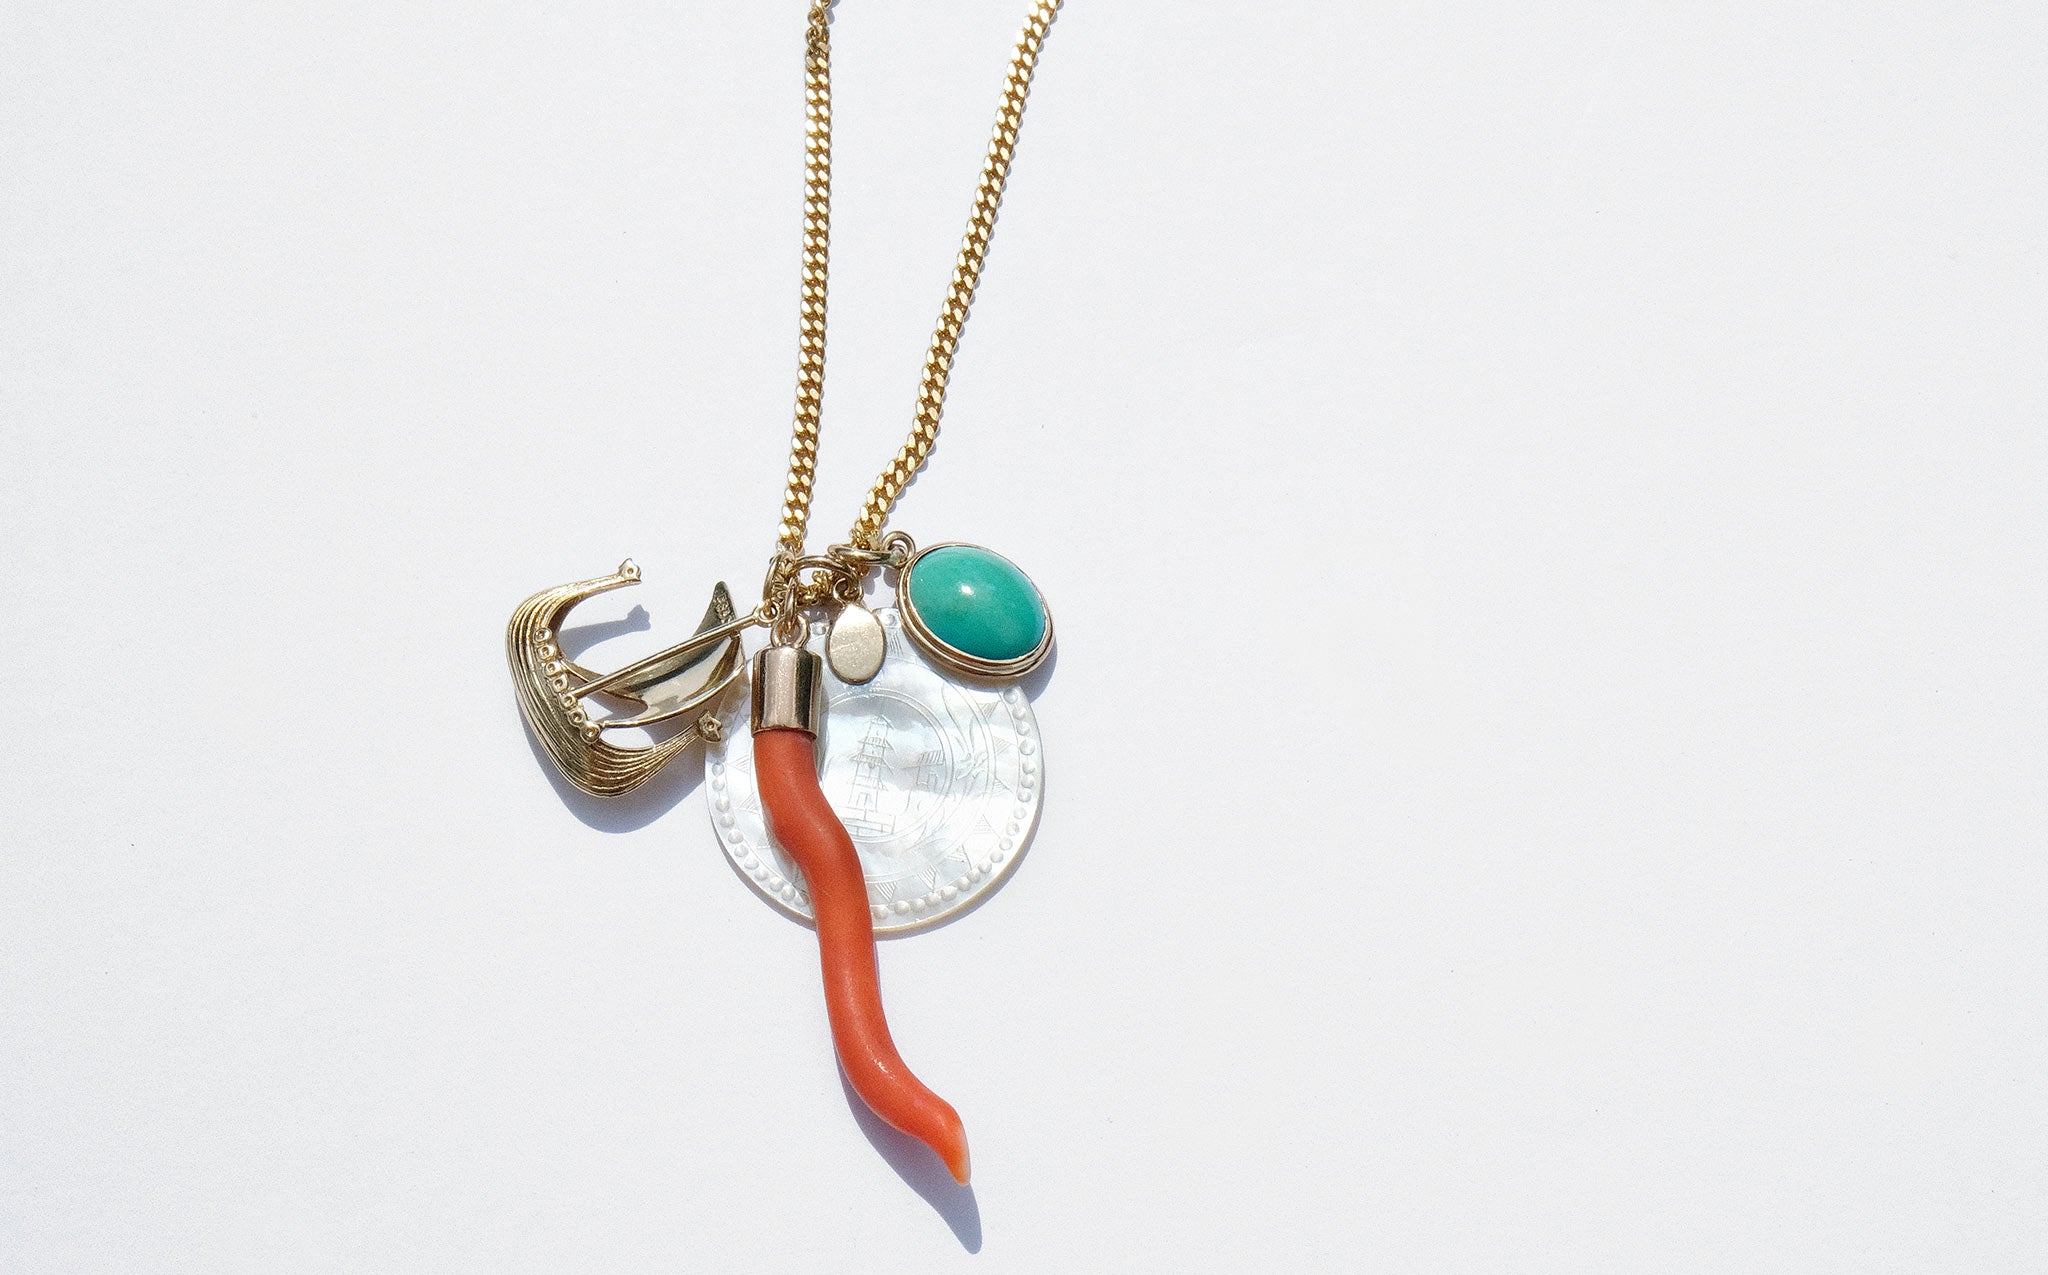 The Journey Charm Necklace